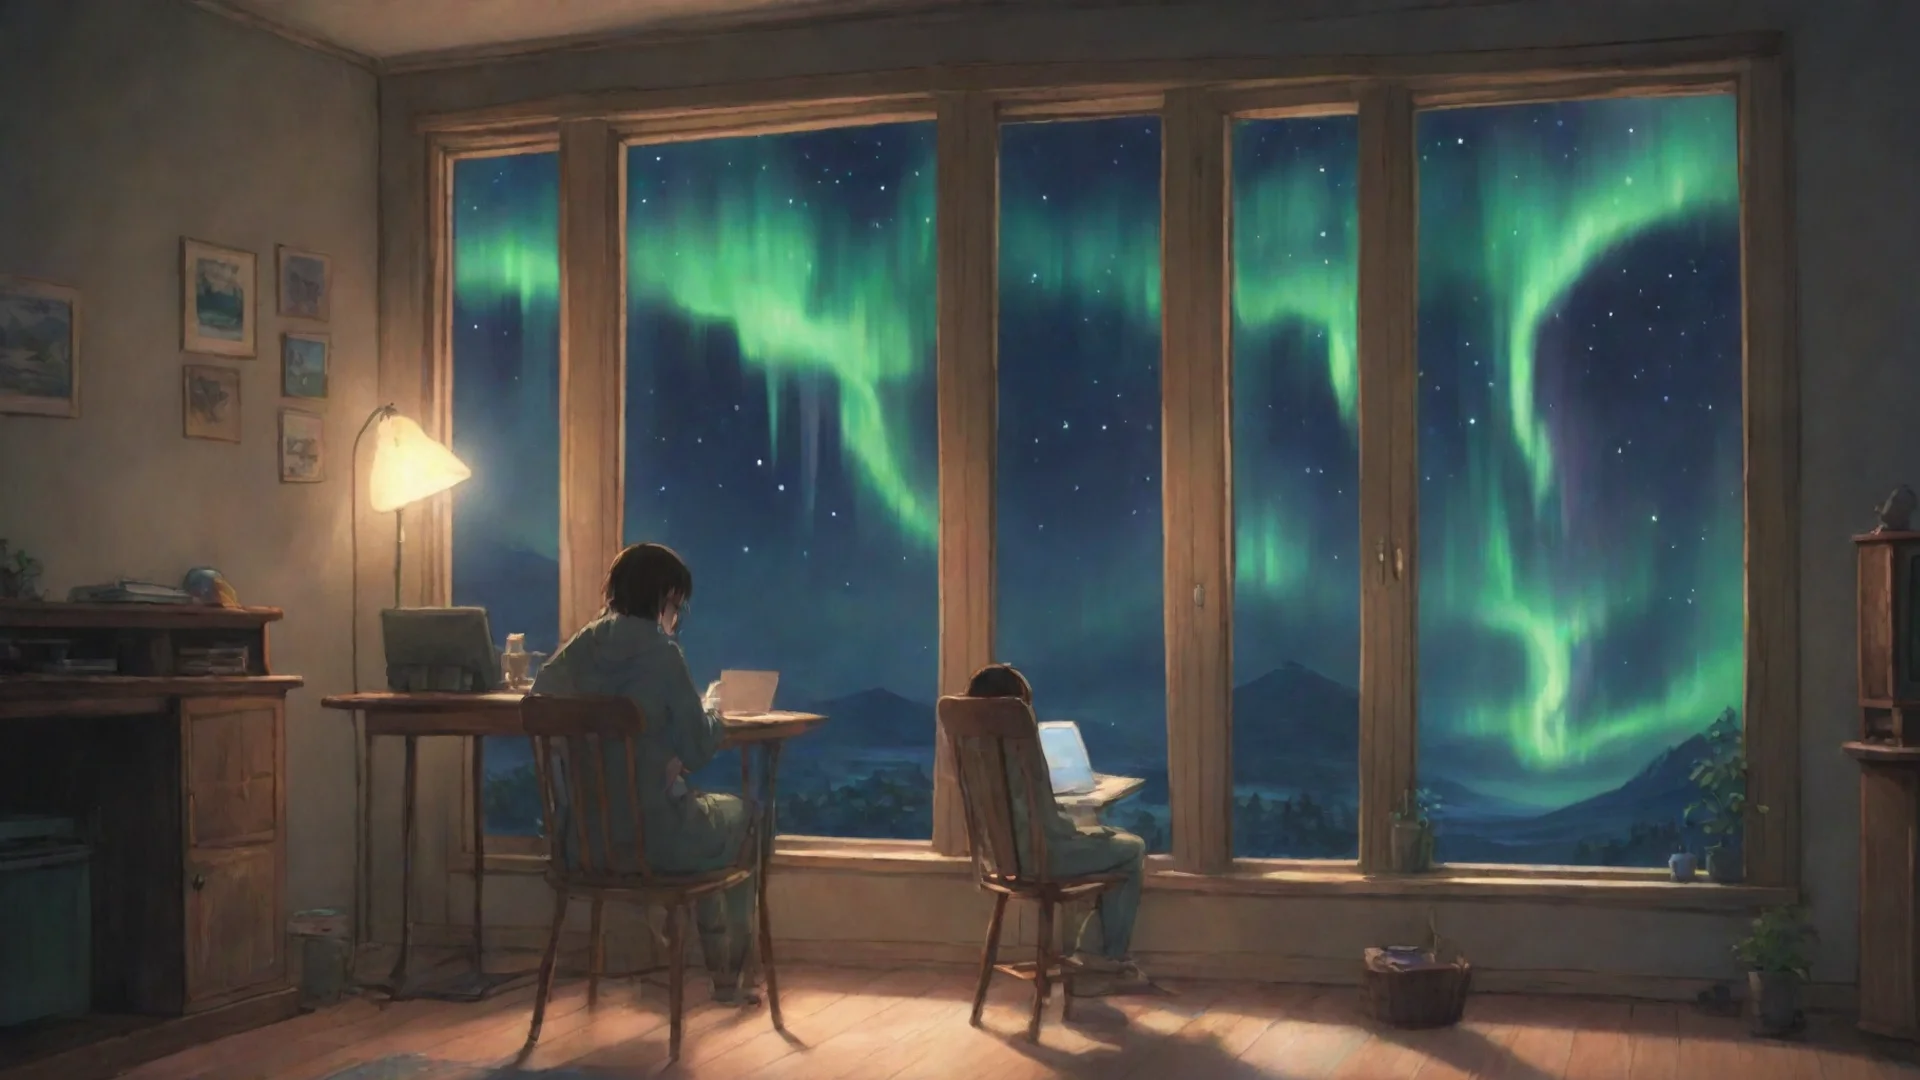 aiamazing can you draw of a girl sitting on a chair and using a computer inside of his house and the window is like northern lights in studio ghibli art style awesome portrait 2 hdwidescreen